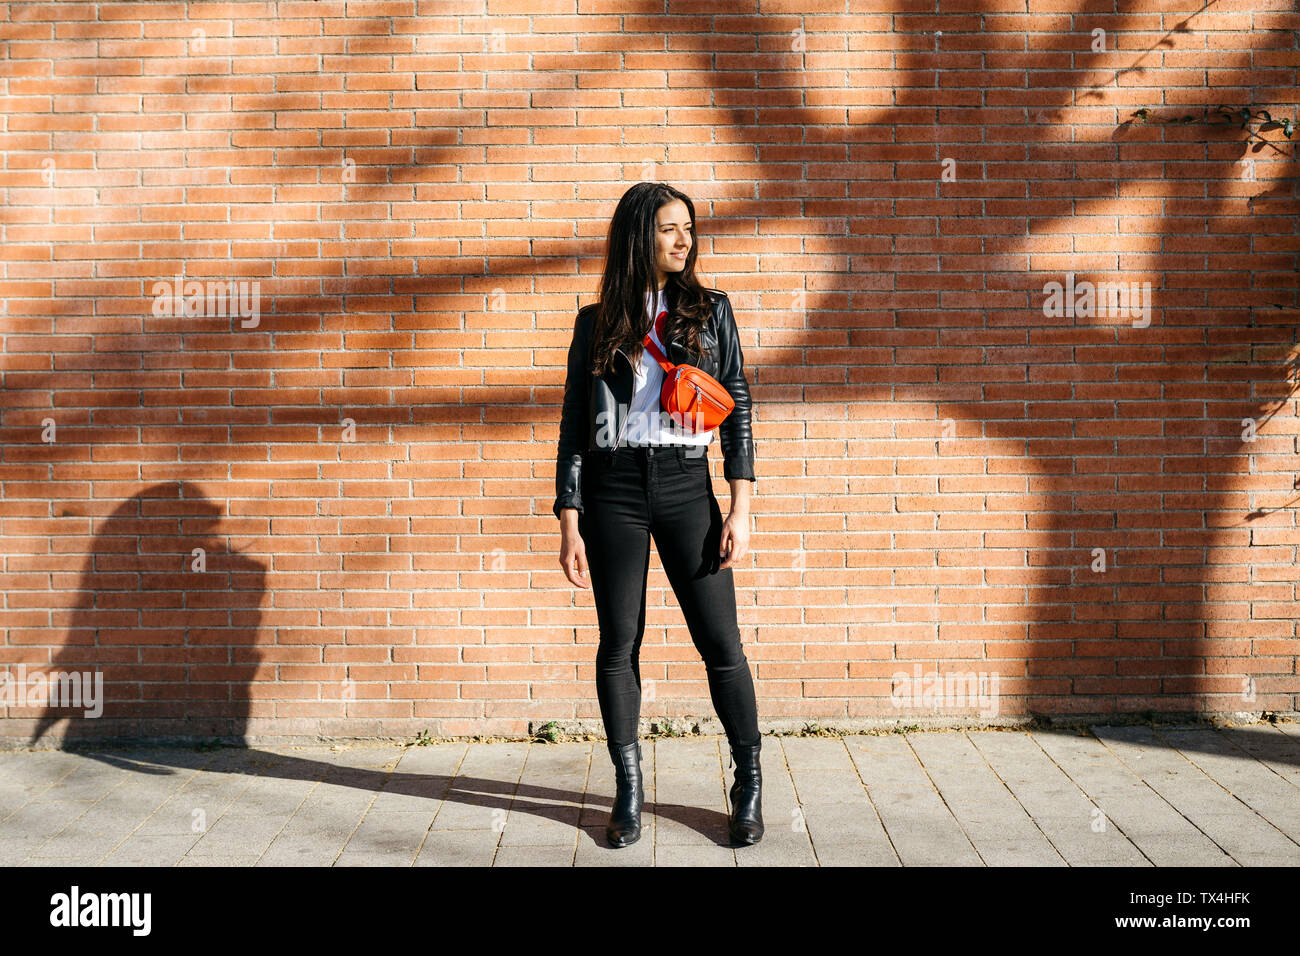 Young woman with a red bag waiting at a brick wall in the background and a shadow of tree Stock Photo